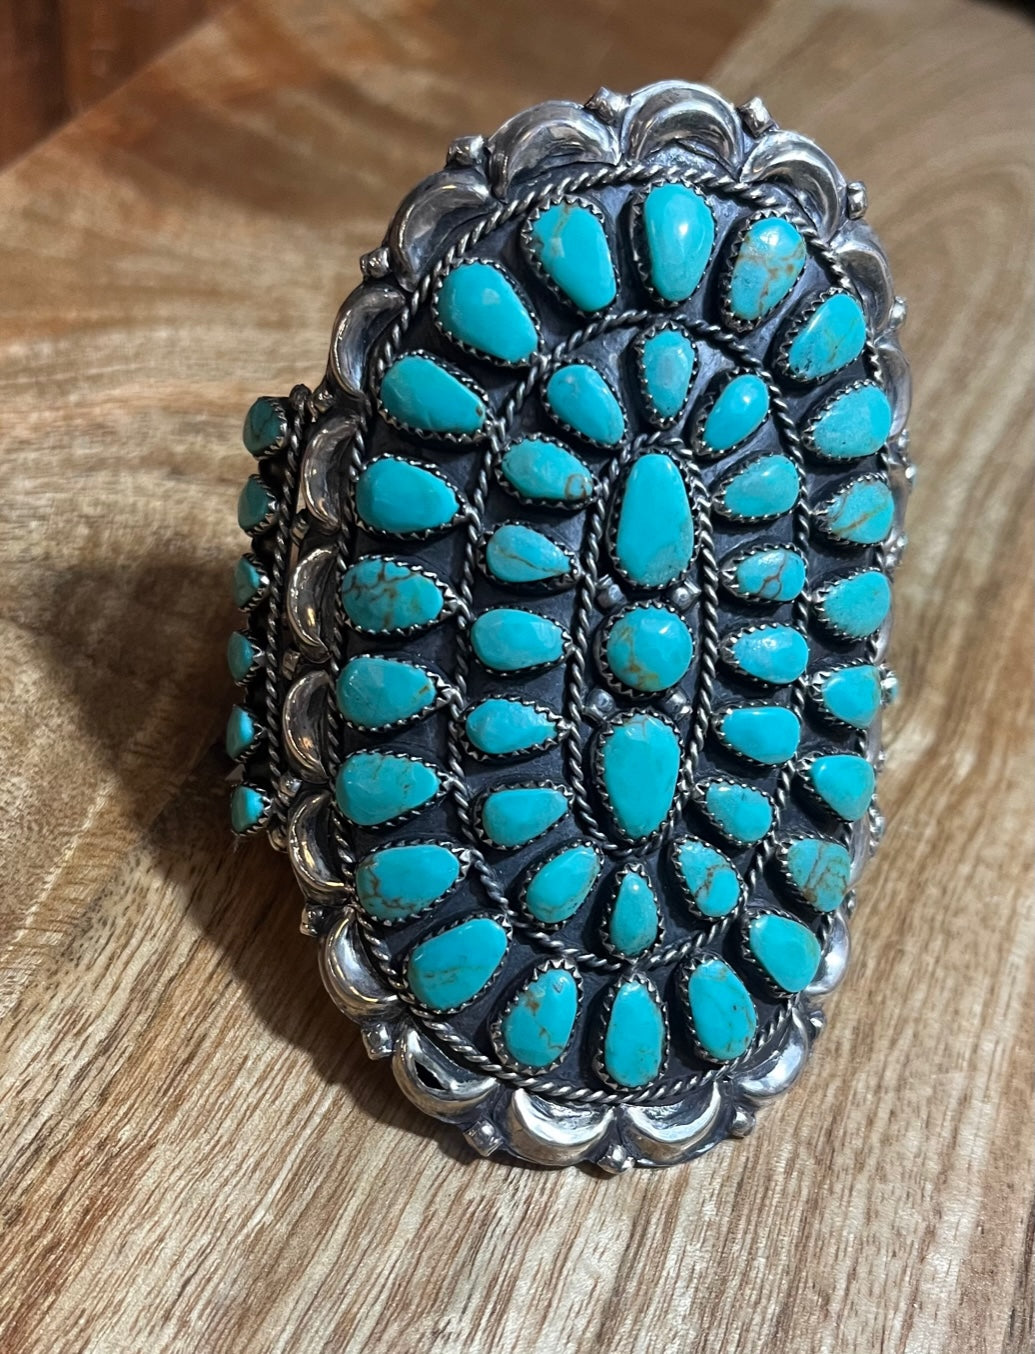 Turquoise | Authentic Navajo Large Turquoise Cluster Bracelet